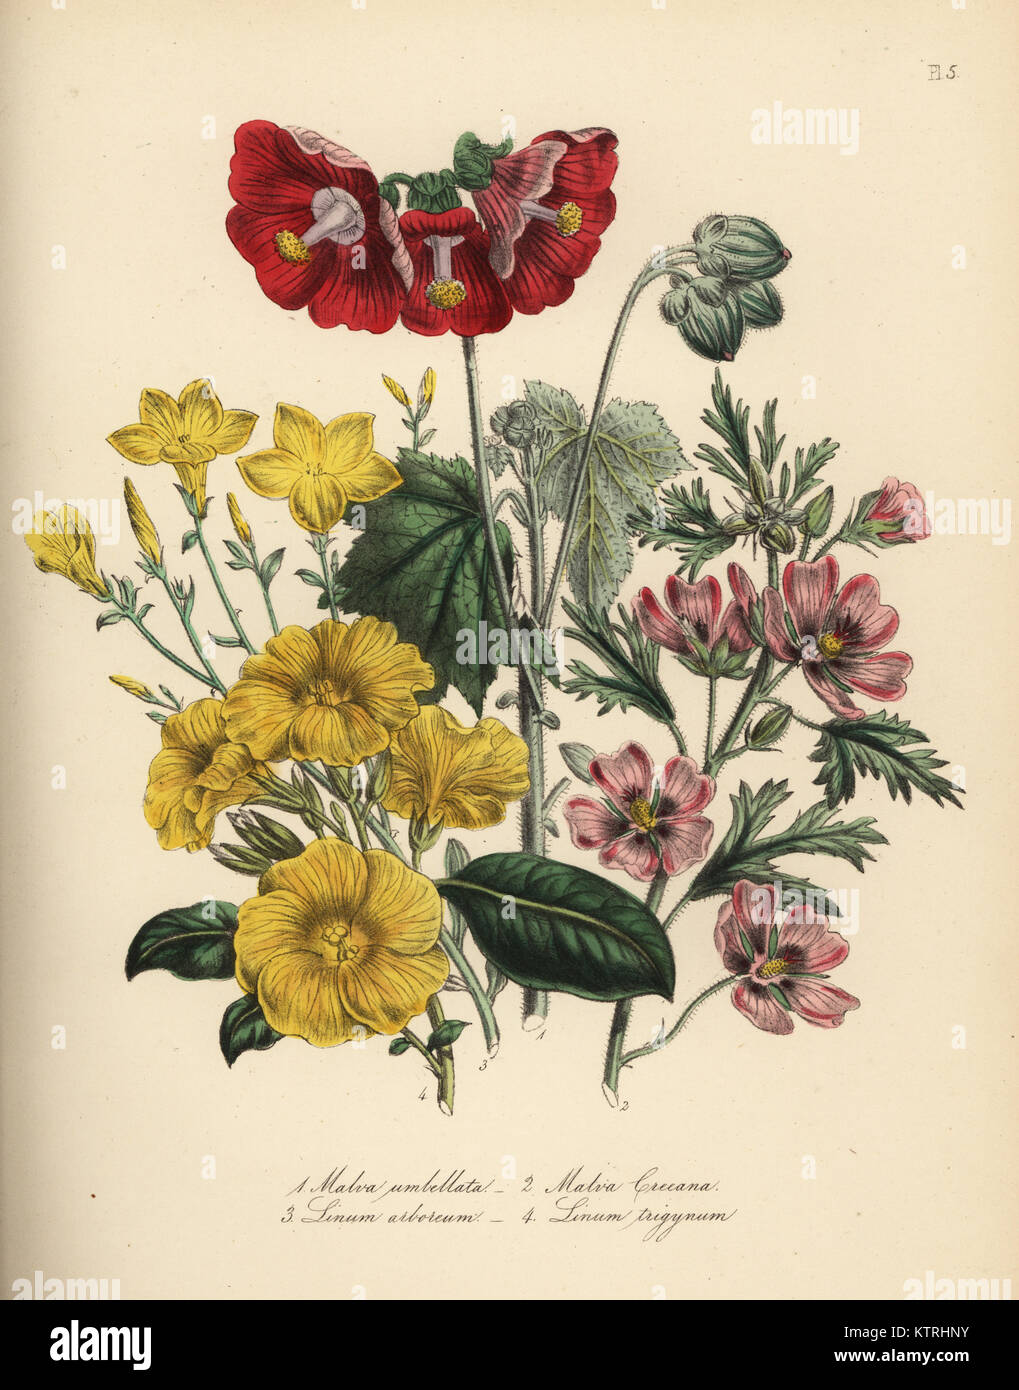 Umbellate globe-mallow, Malva umbellata, showy red-flowered mallow, Malva creeana, tree flax, Linum arboreum, and Indian flax, Linum trigynum. Handfinished chromolithograph by Noel Humphreys after an illustration by Jane Loudon from Mrs. Jane Loudon's Ladies Flower Garden or Ornamental Greenhouse Plants, William S. Orr, London, 1849. Stock Photo